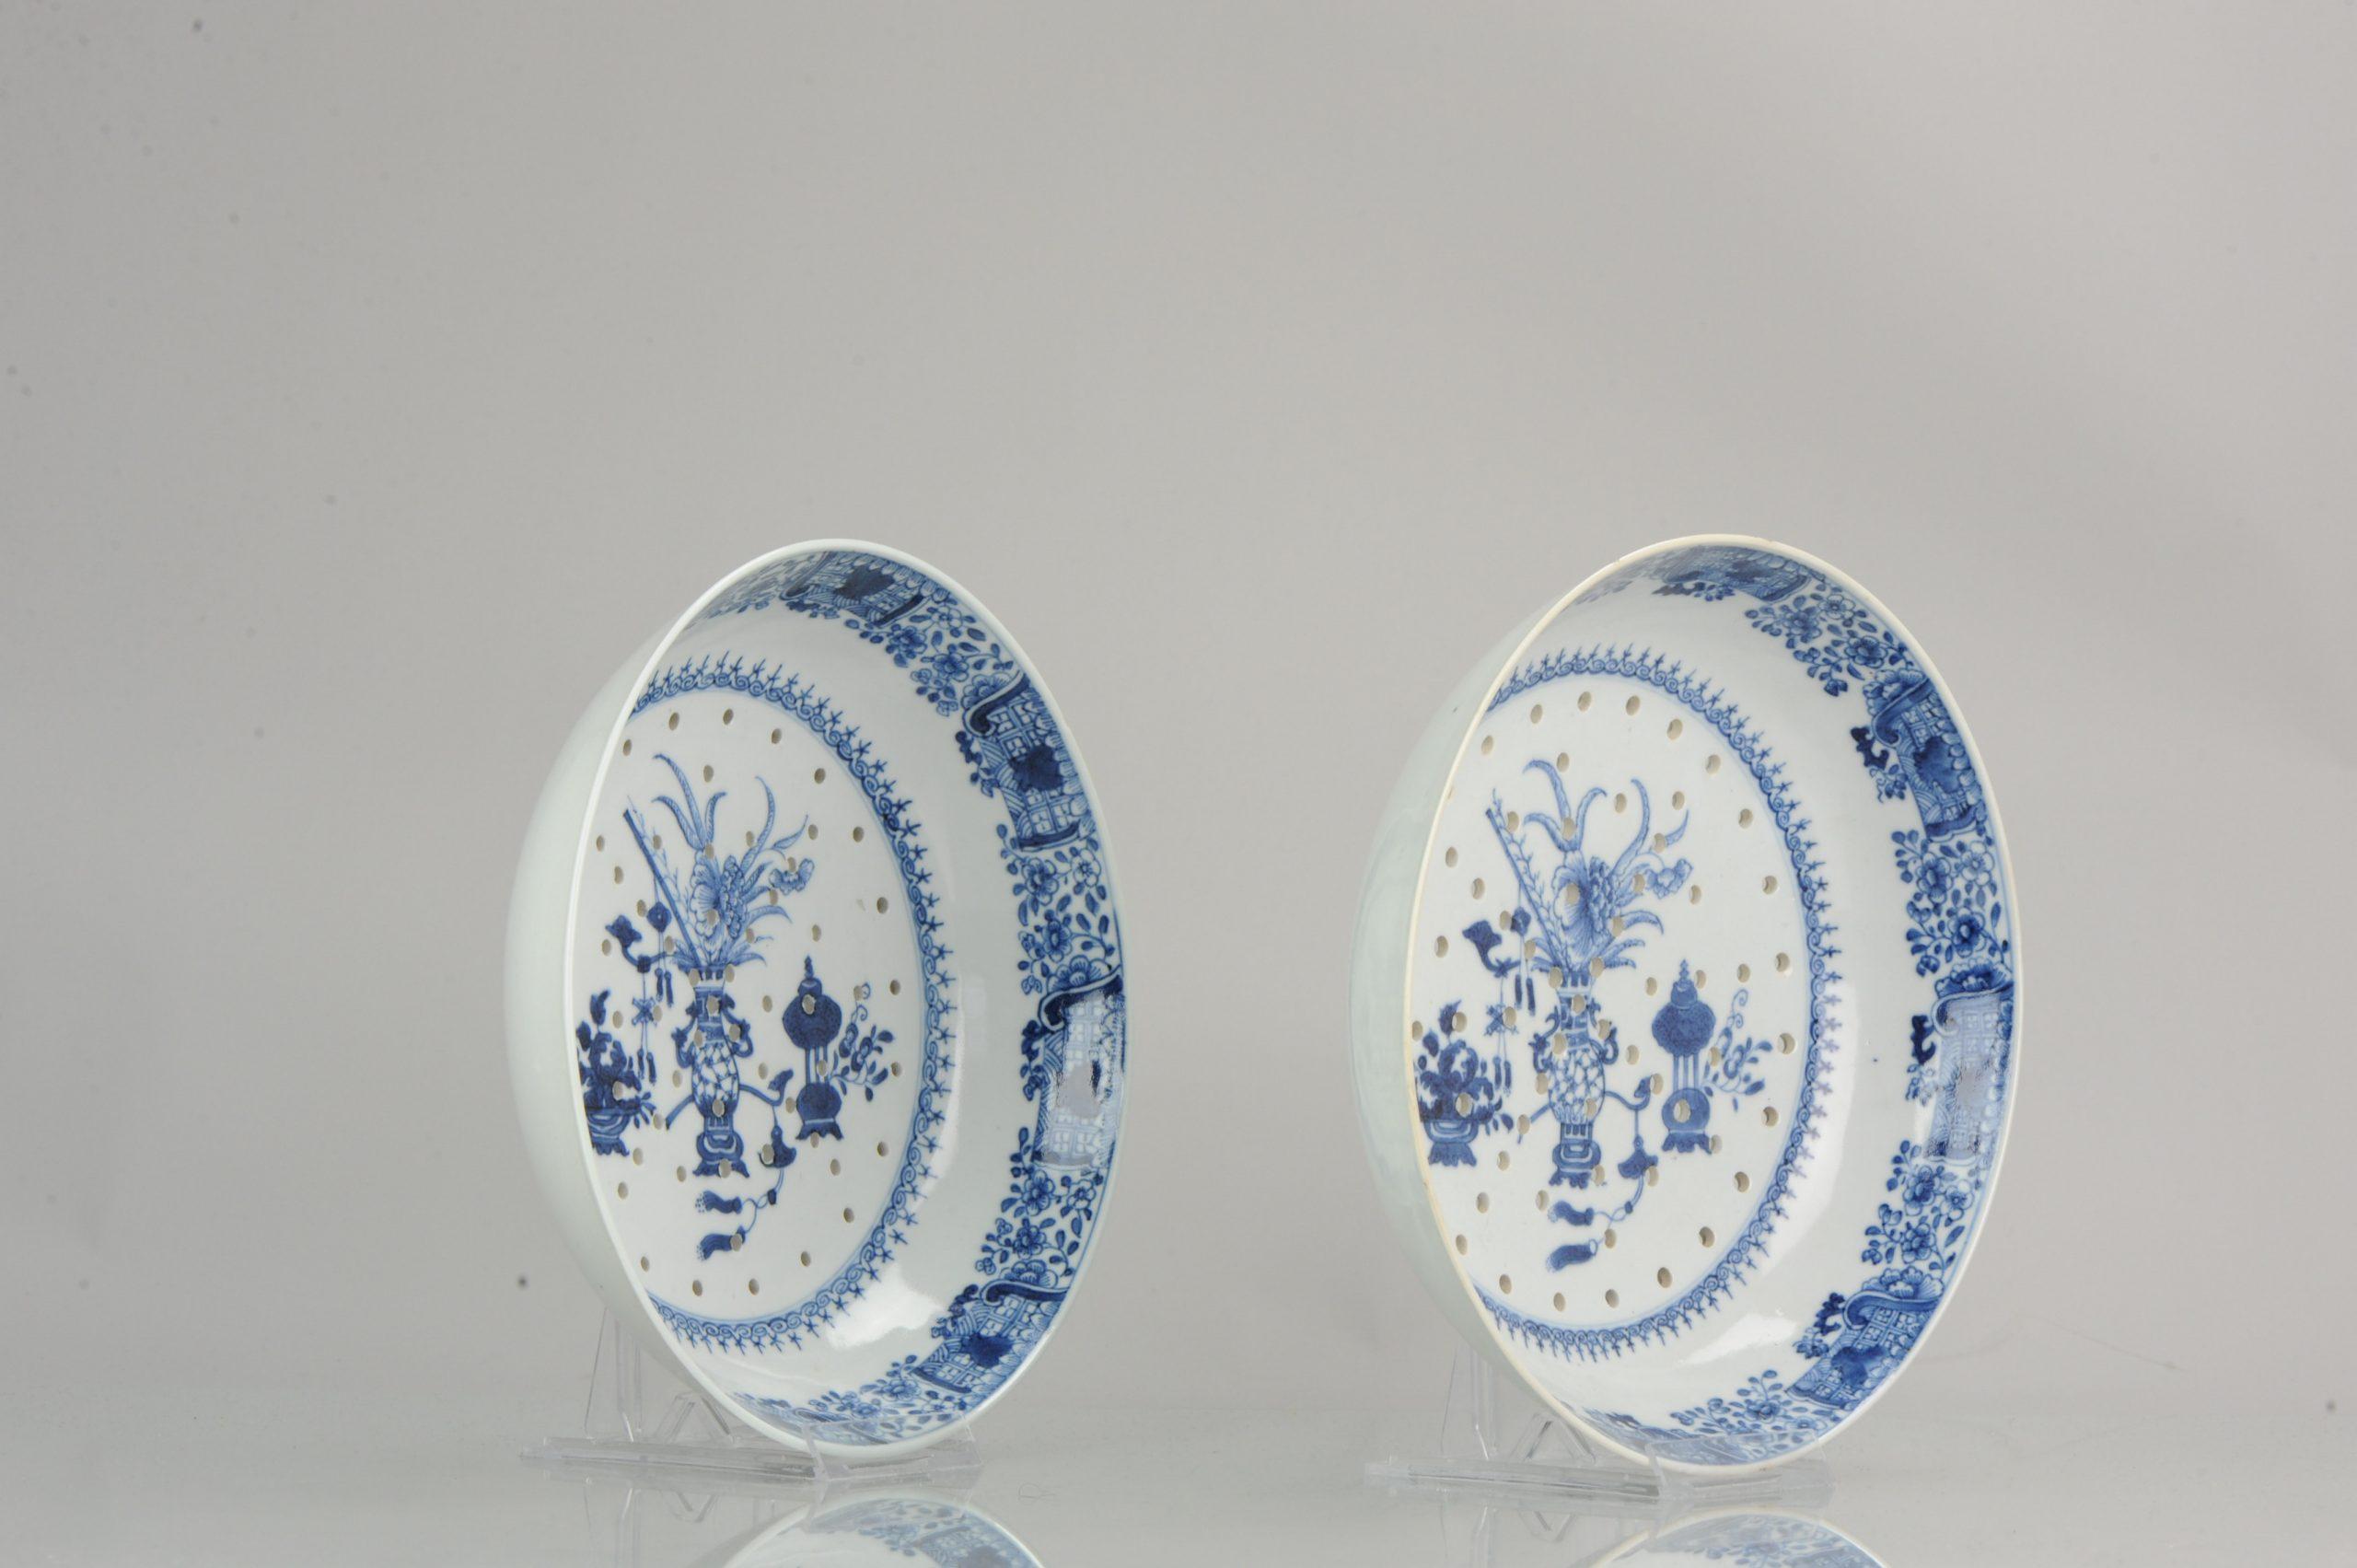 A nice strainers. Qing Dynasty - Qing Period. Central scene of a valuables.

Additional information:
Material: Porcelain & Pottery
Region of Origin: China
Period: 18th century Qing (1661 - 1912)
Age: Pre-1800
Condition: Overall Condition;